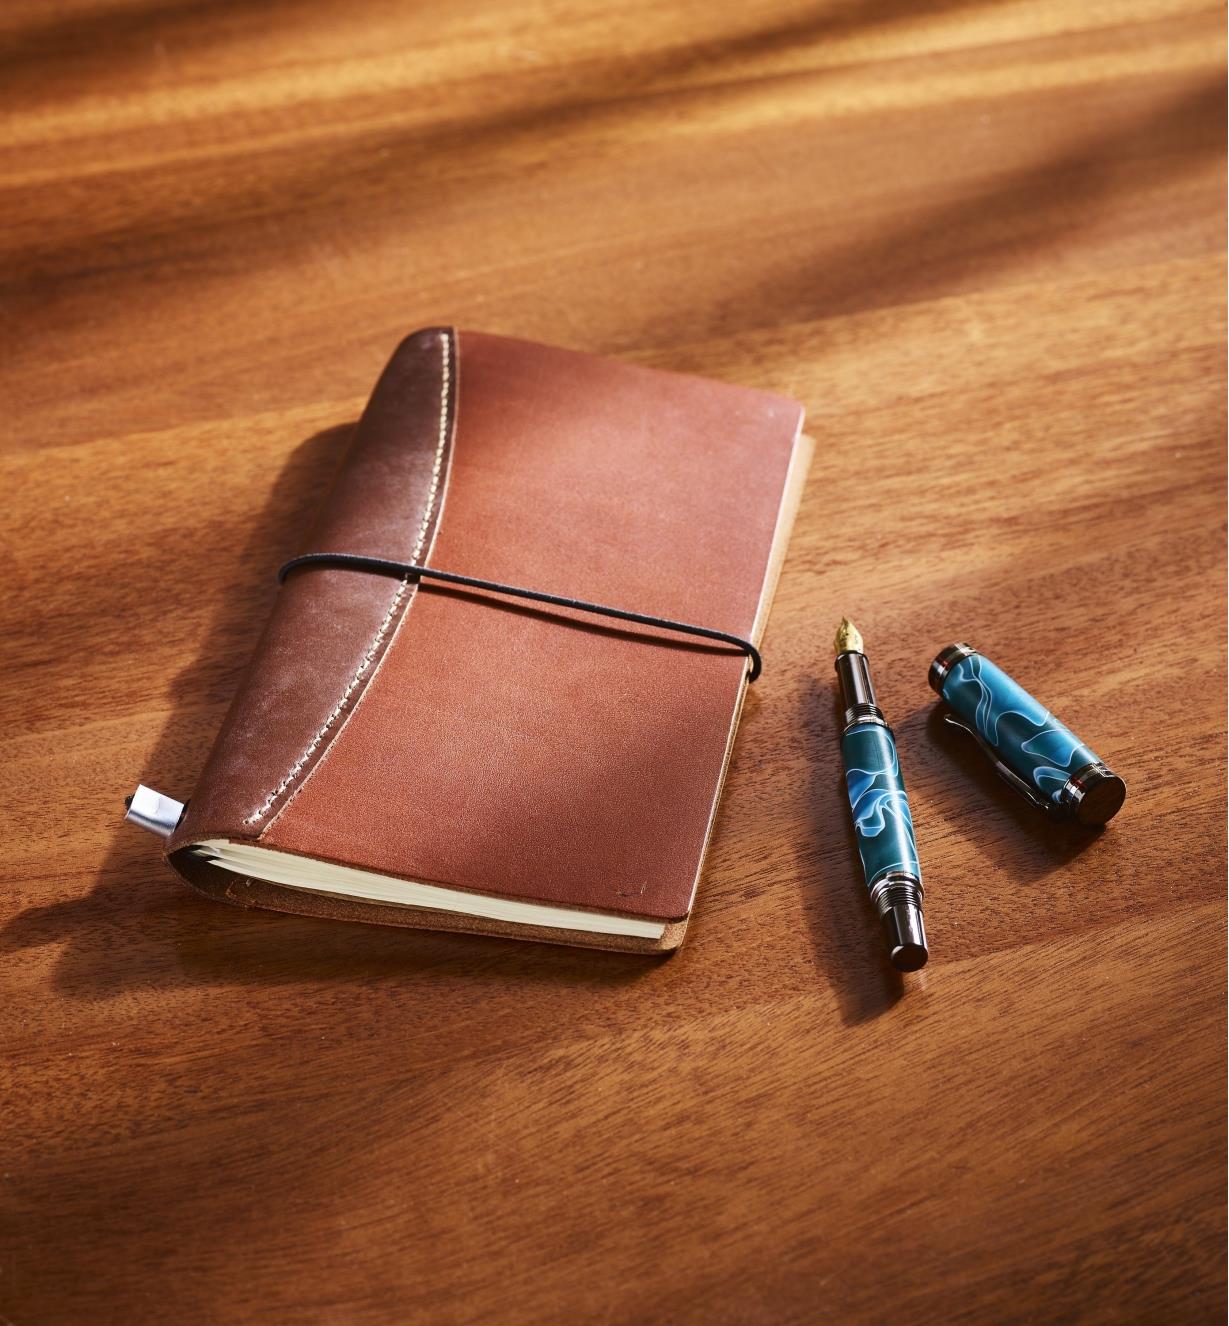 A completed leathercraft notebook sits next to a calligraphy pen